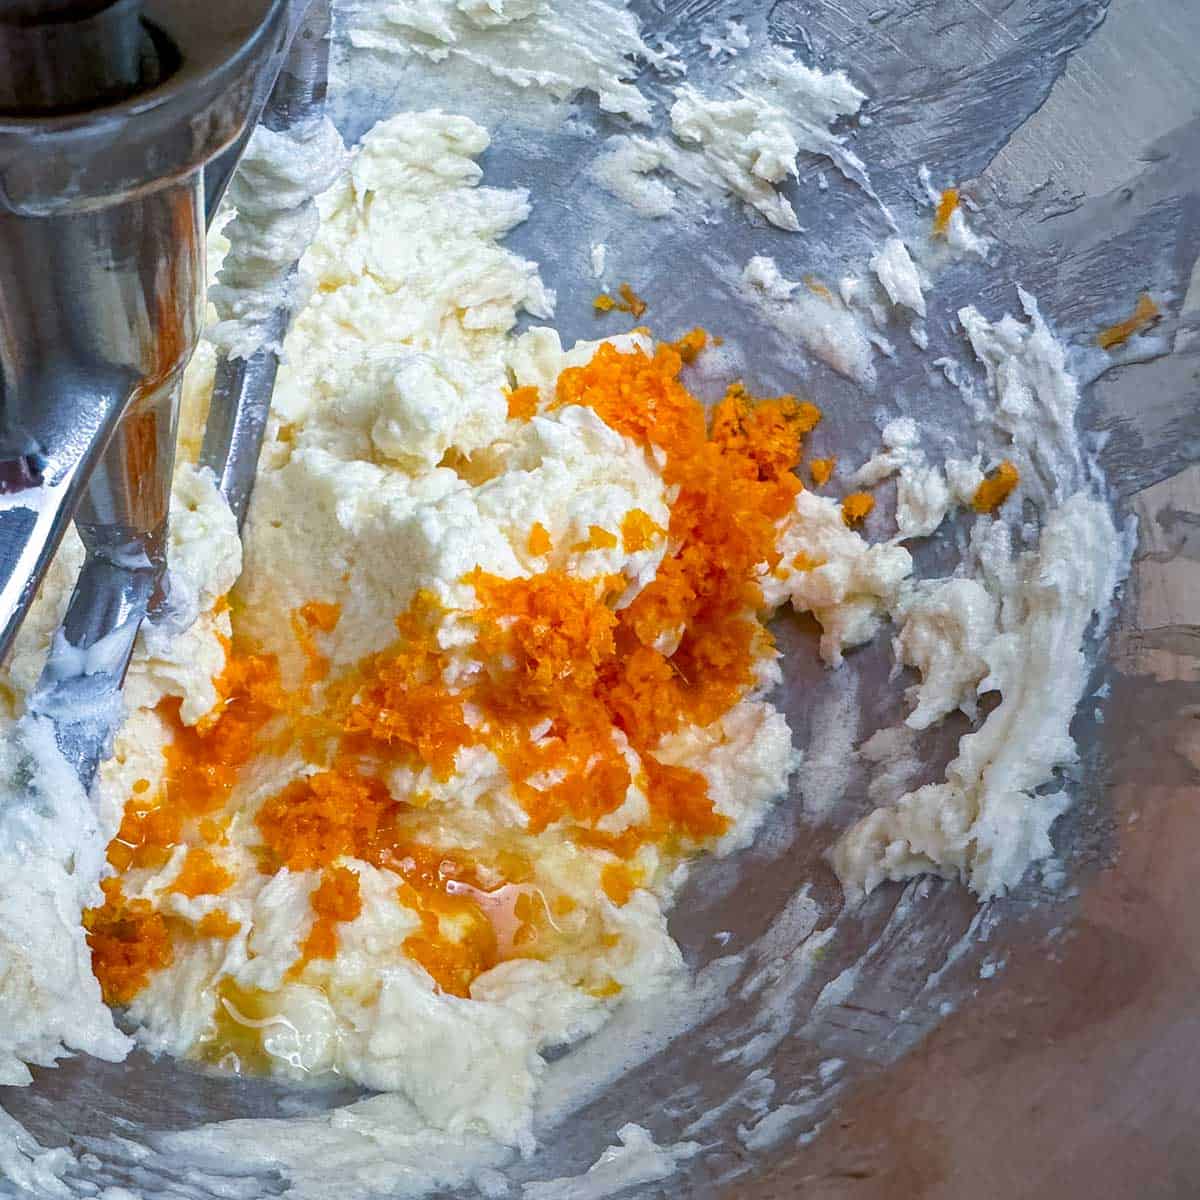 Butter sugar mixture in the bowl with orange juice and zest just getting added.